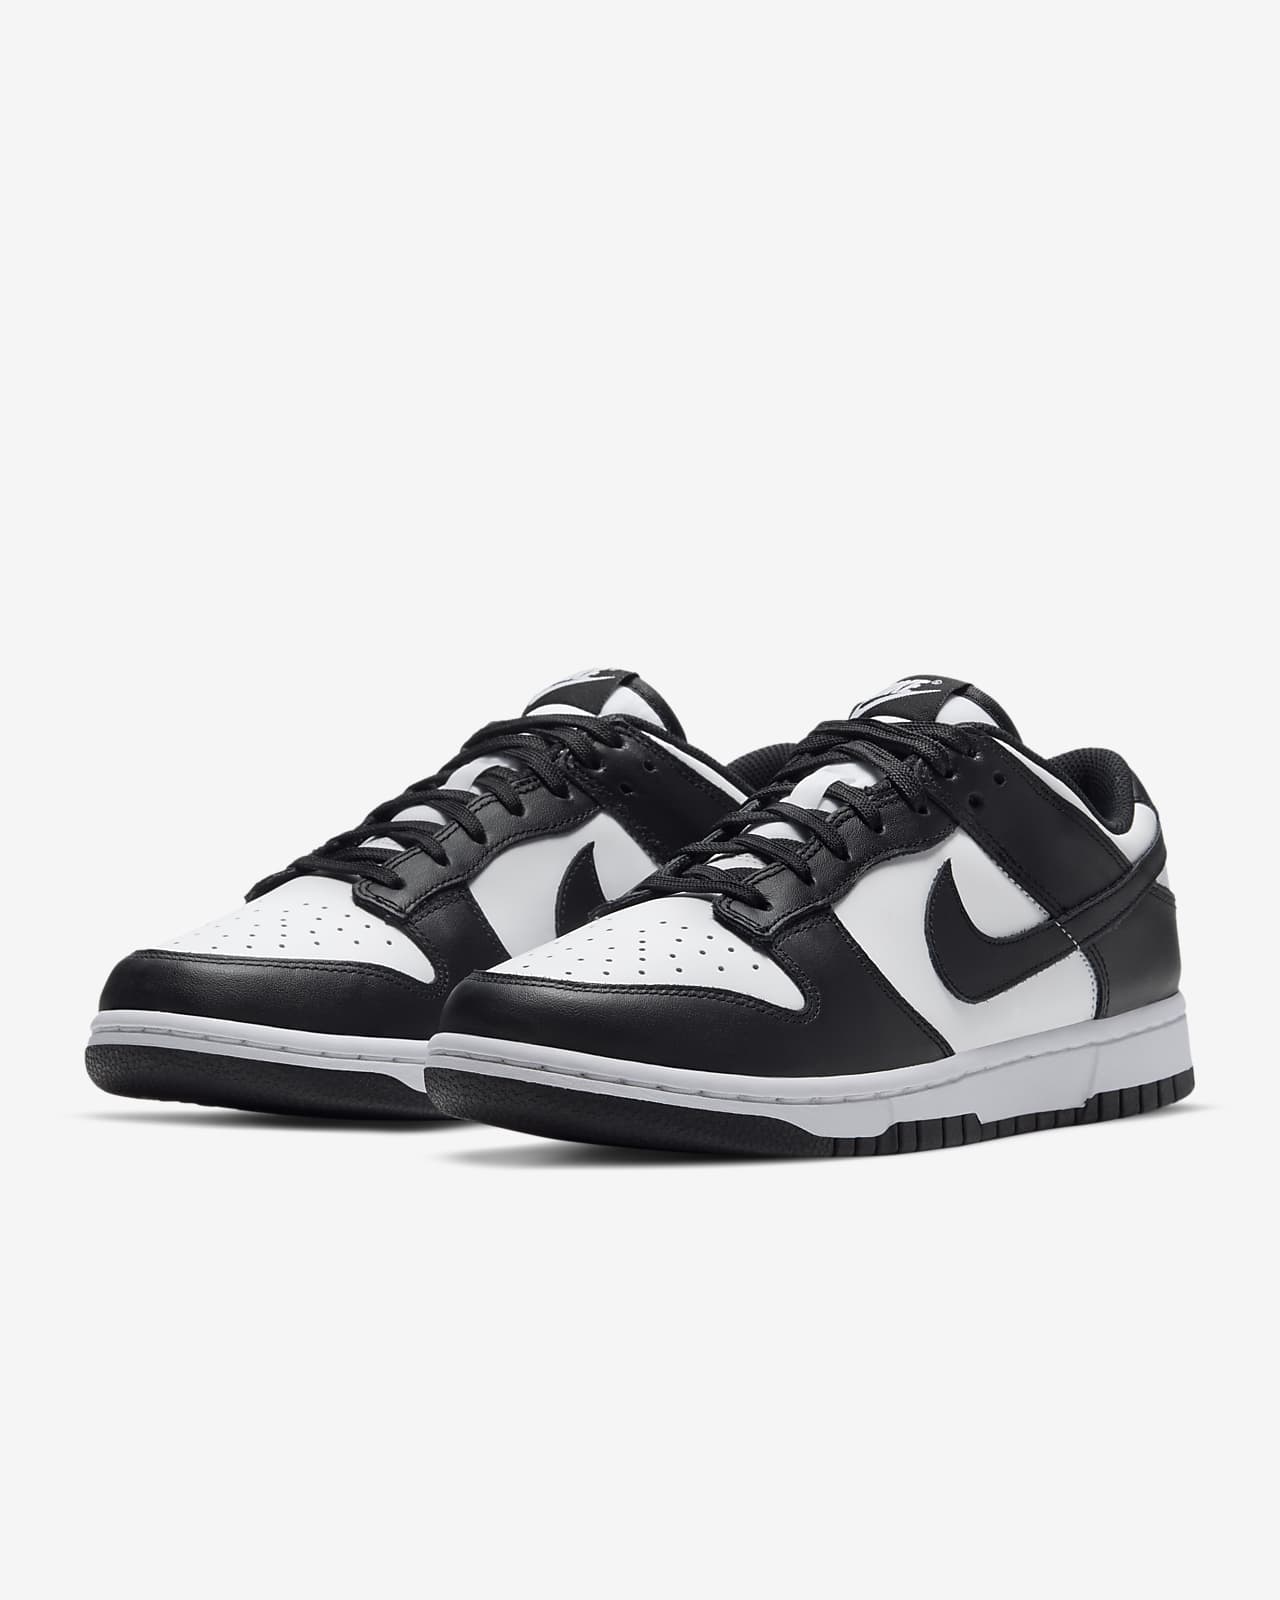 nike dunk low black and white women's